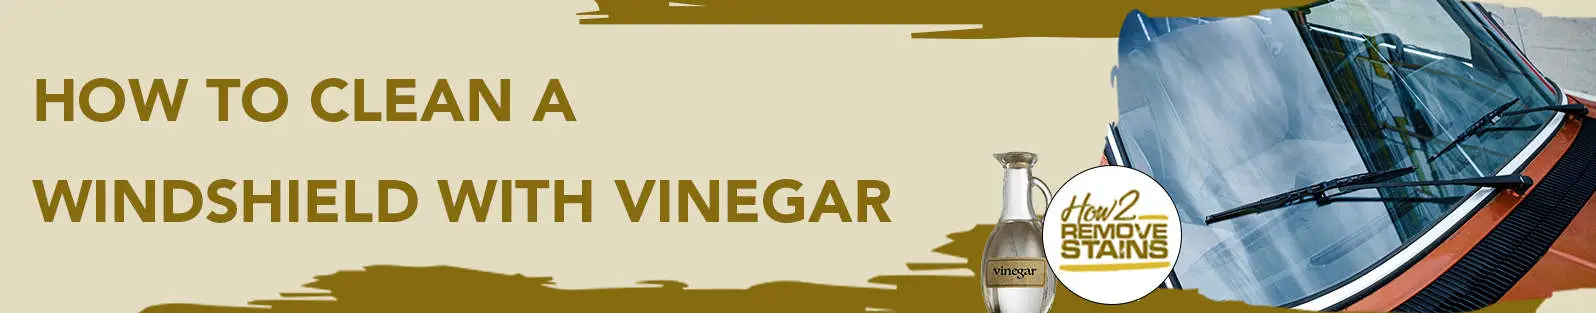 How to clean a windshield with vinegar